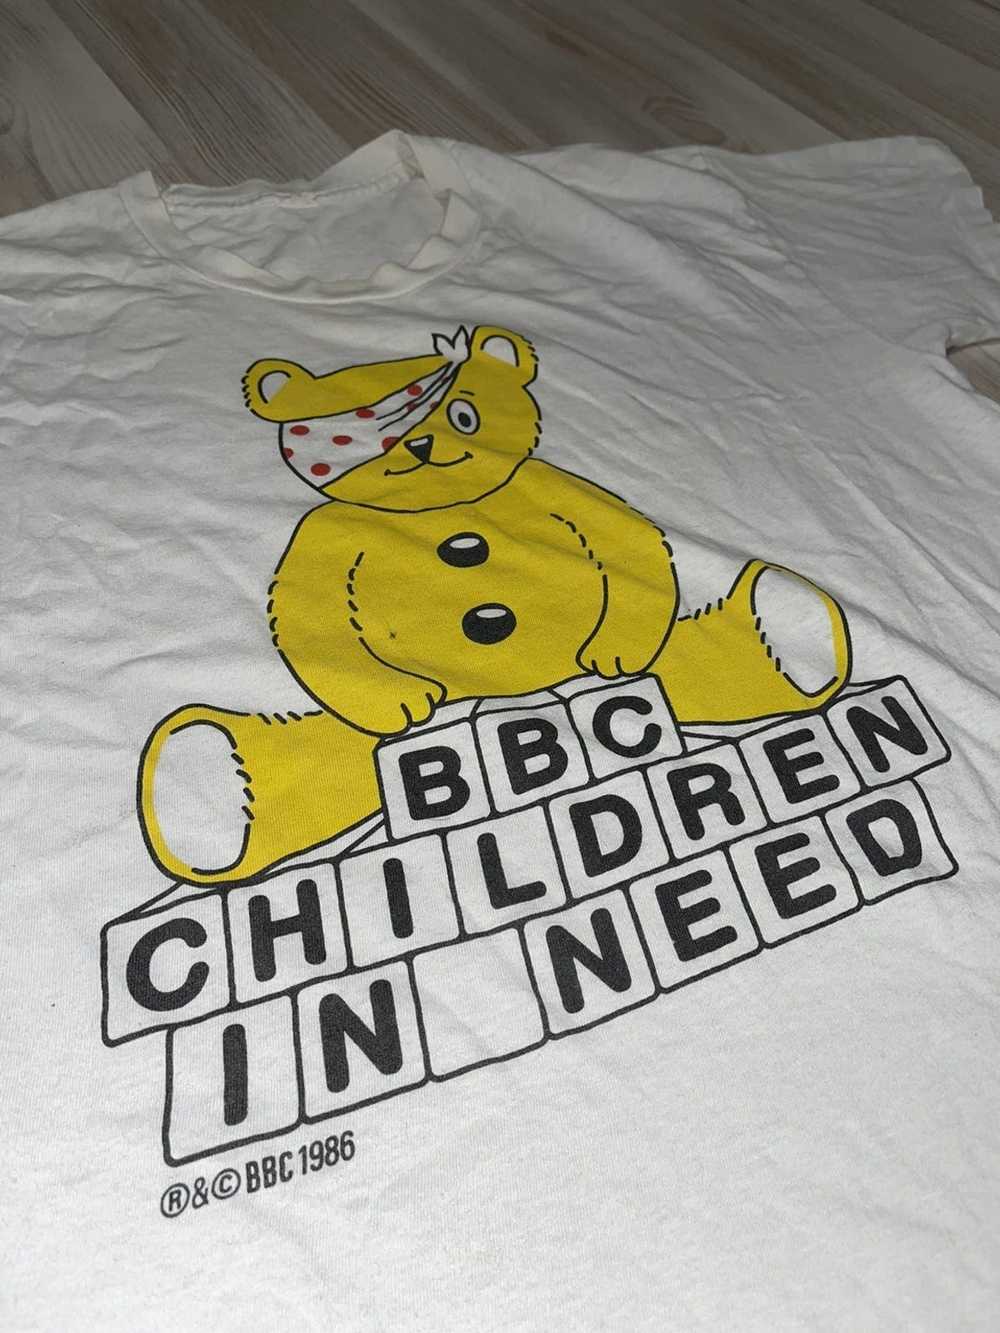 Band Tees × Vintage BBC Children In Need 80s vint… - image 5